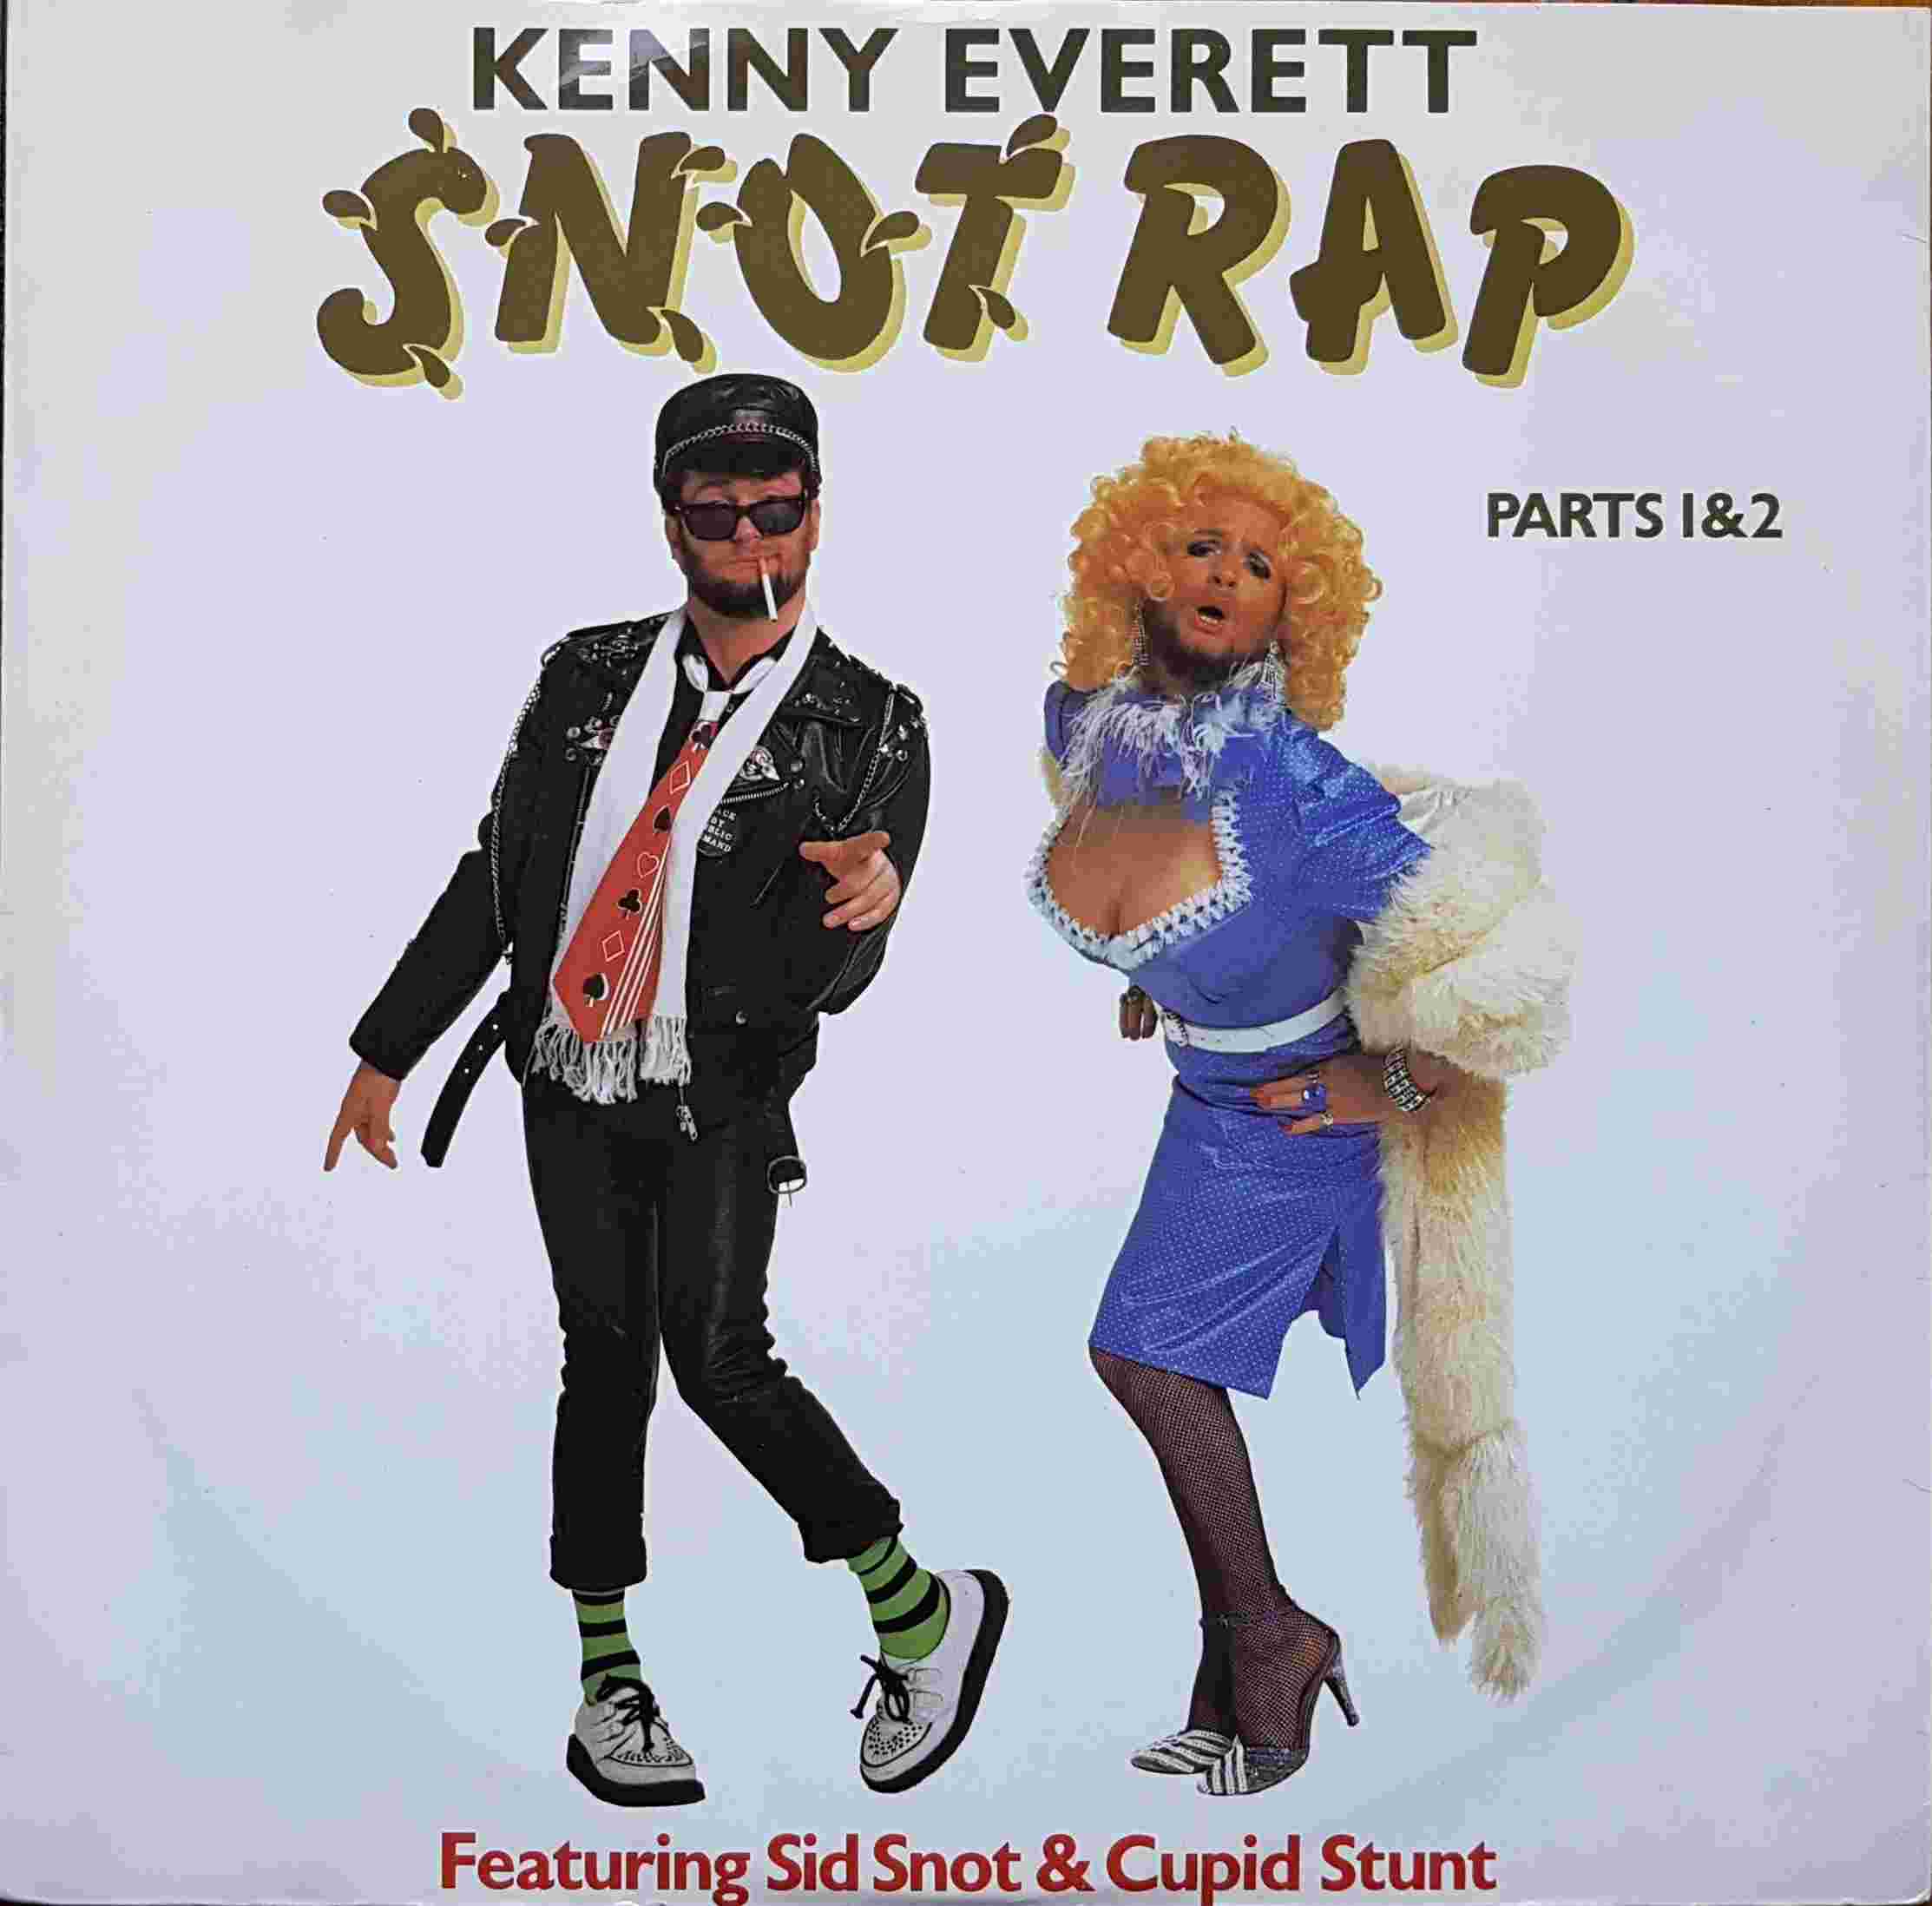 Picture of Snot rap (Kenny Everett television show) by artist Moran / Don / Cameron / Cryer from the BBC 12inches - Records and Tapes library